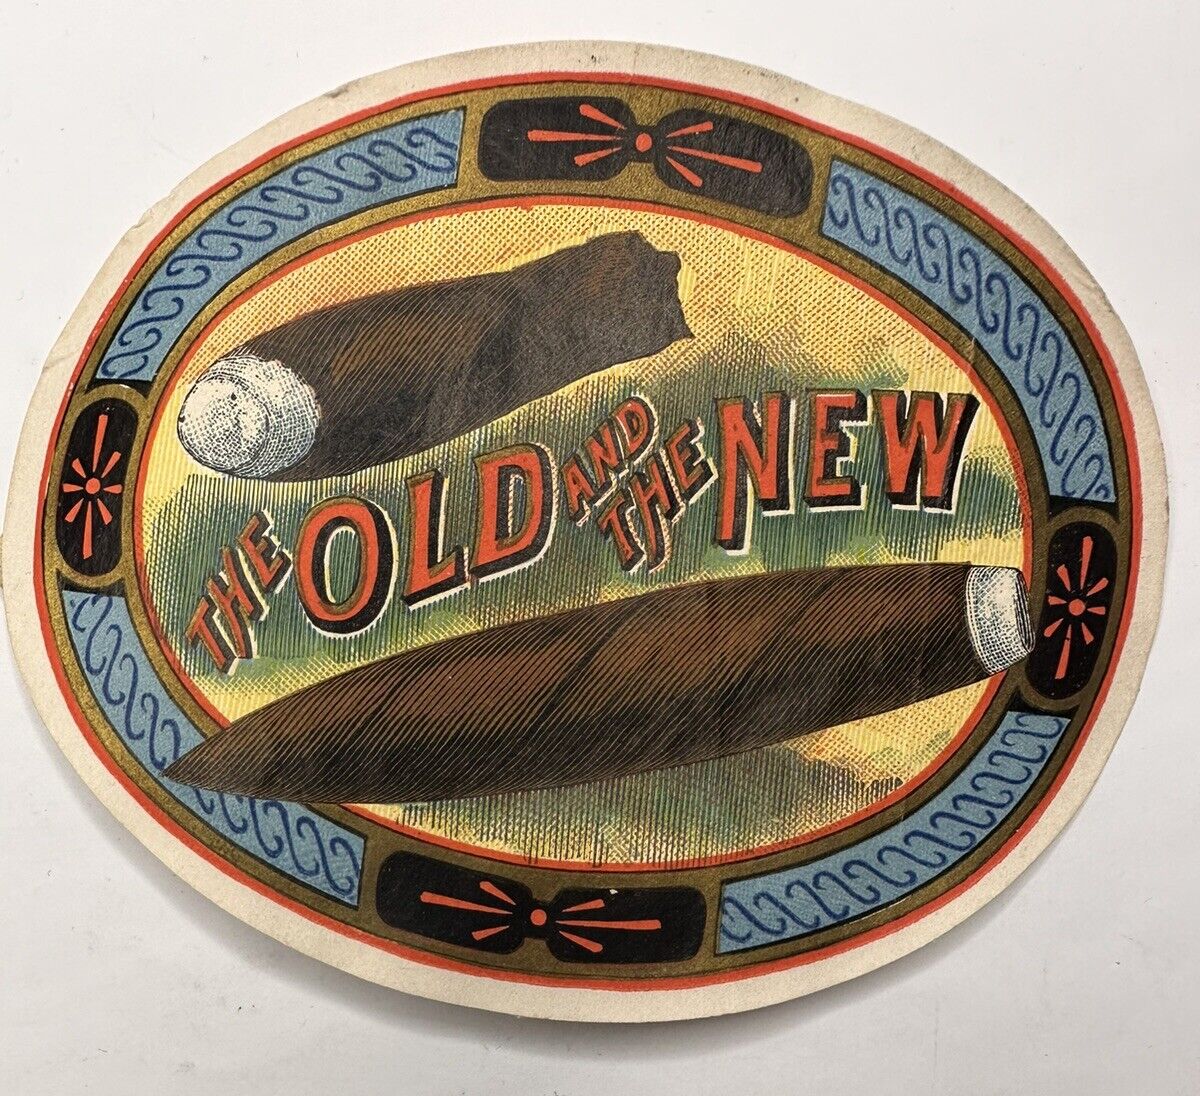 Victorian Cigar product label “ The Old And The New” 4” B59